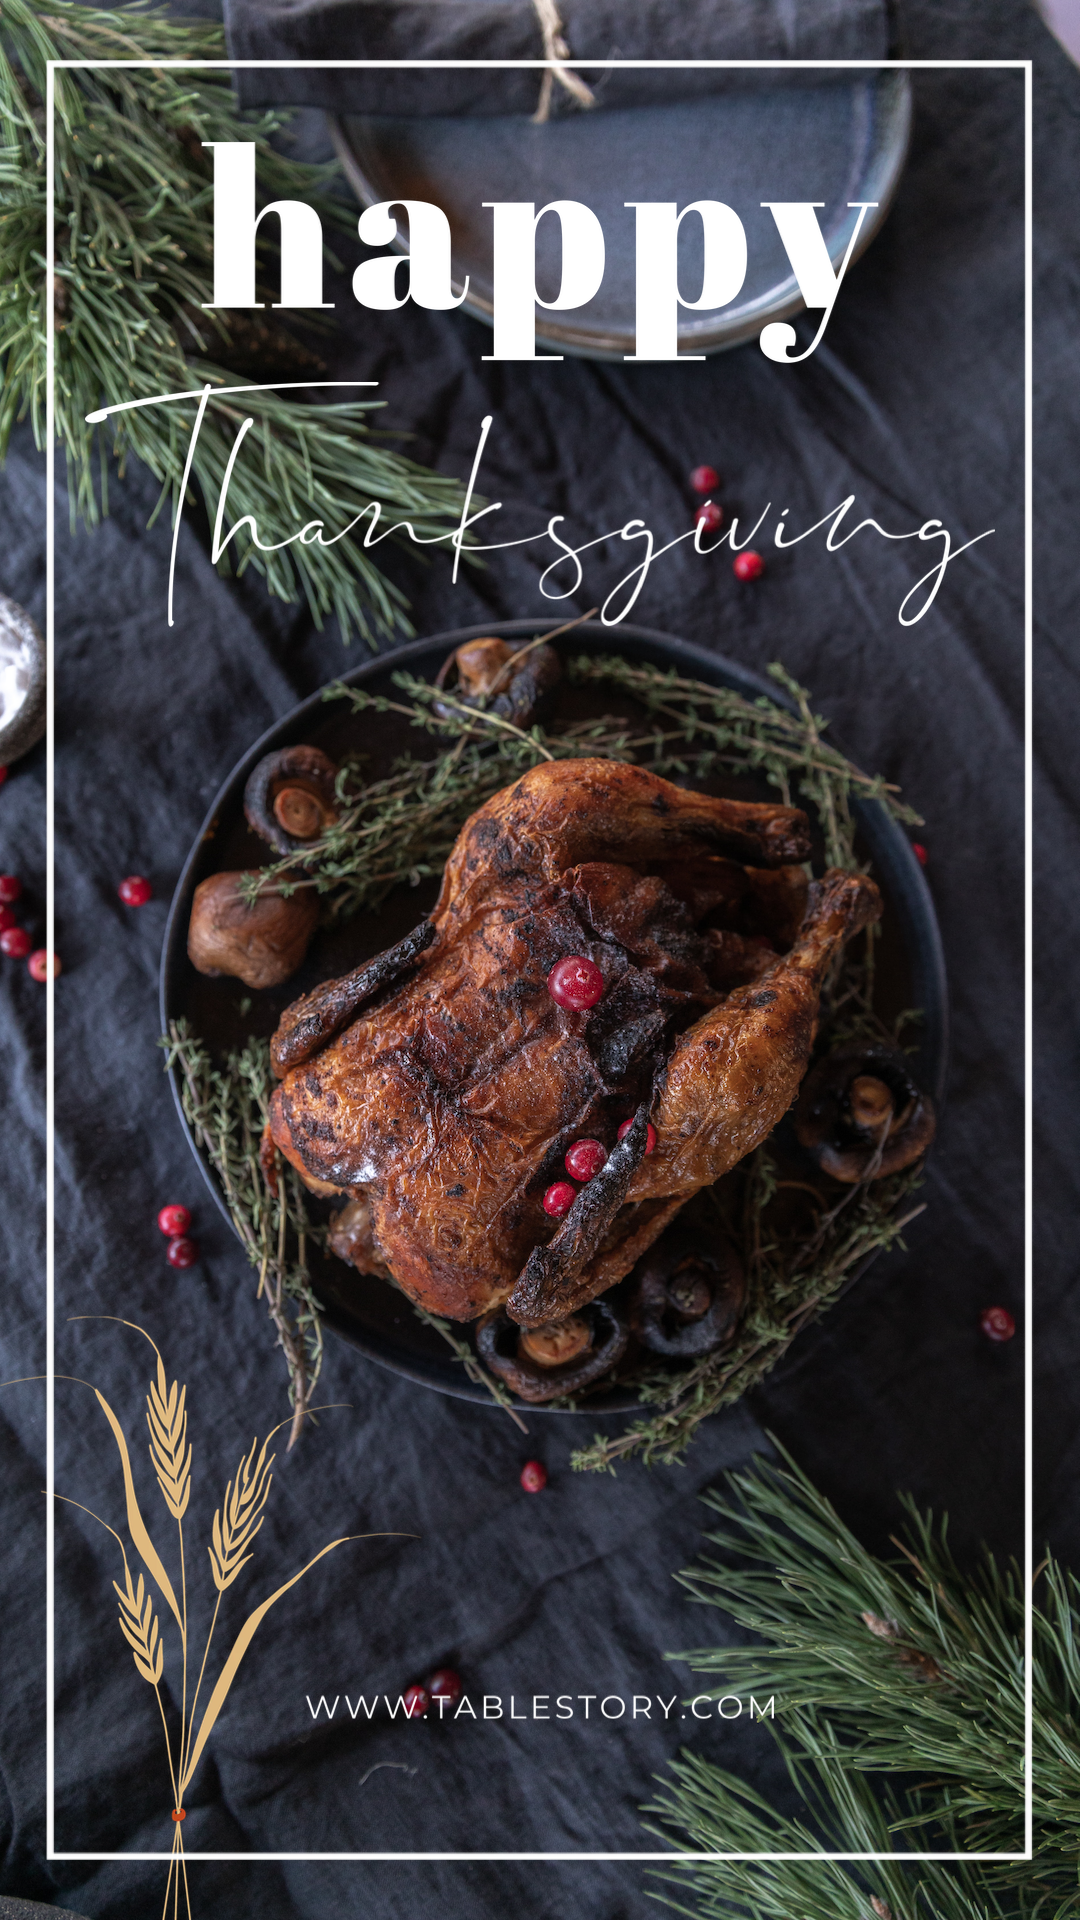 A Roasted Turkey In A Bowl On A Table With Pine Branches And Berries Thanksgiving Template